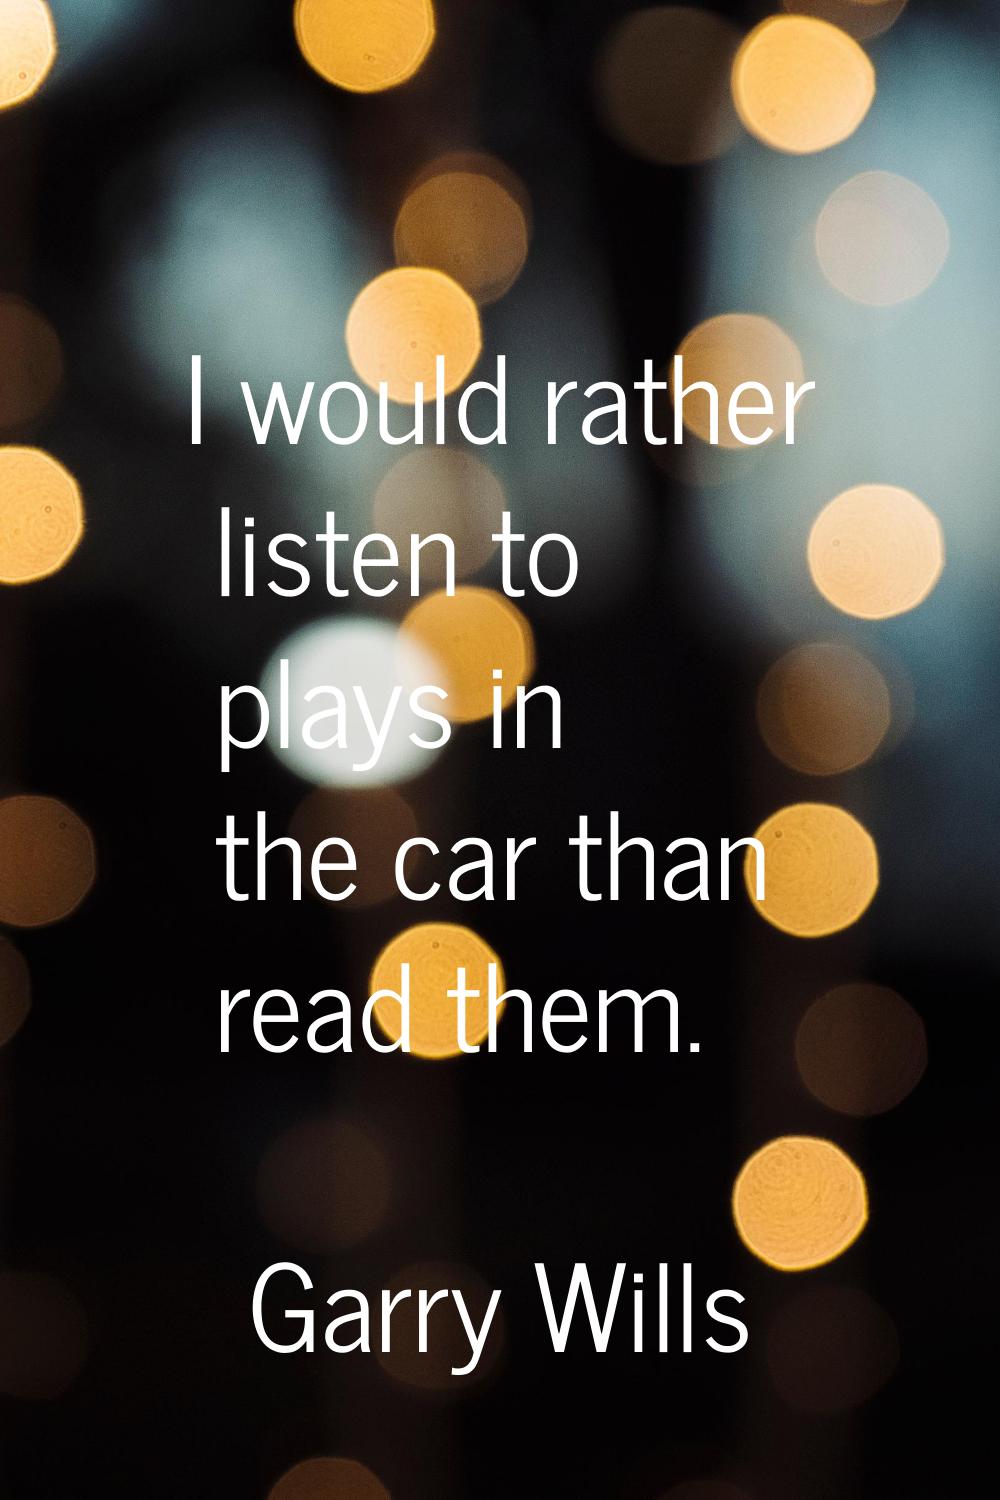 I would rather listen to plays in the car than read them.